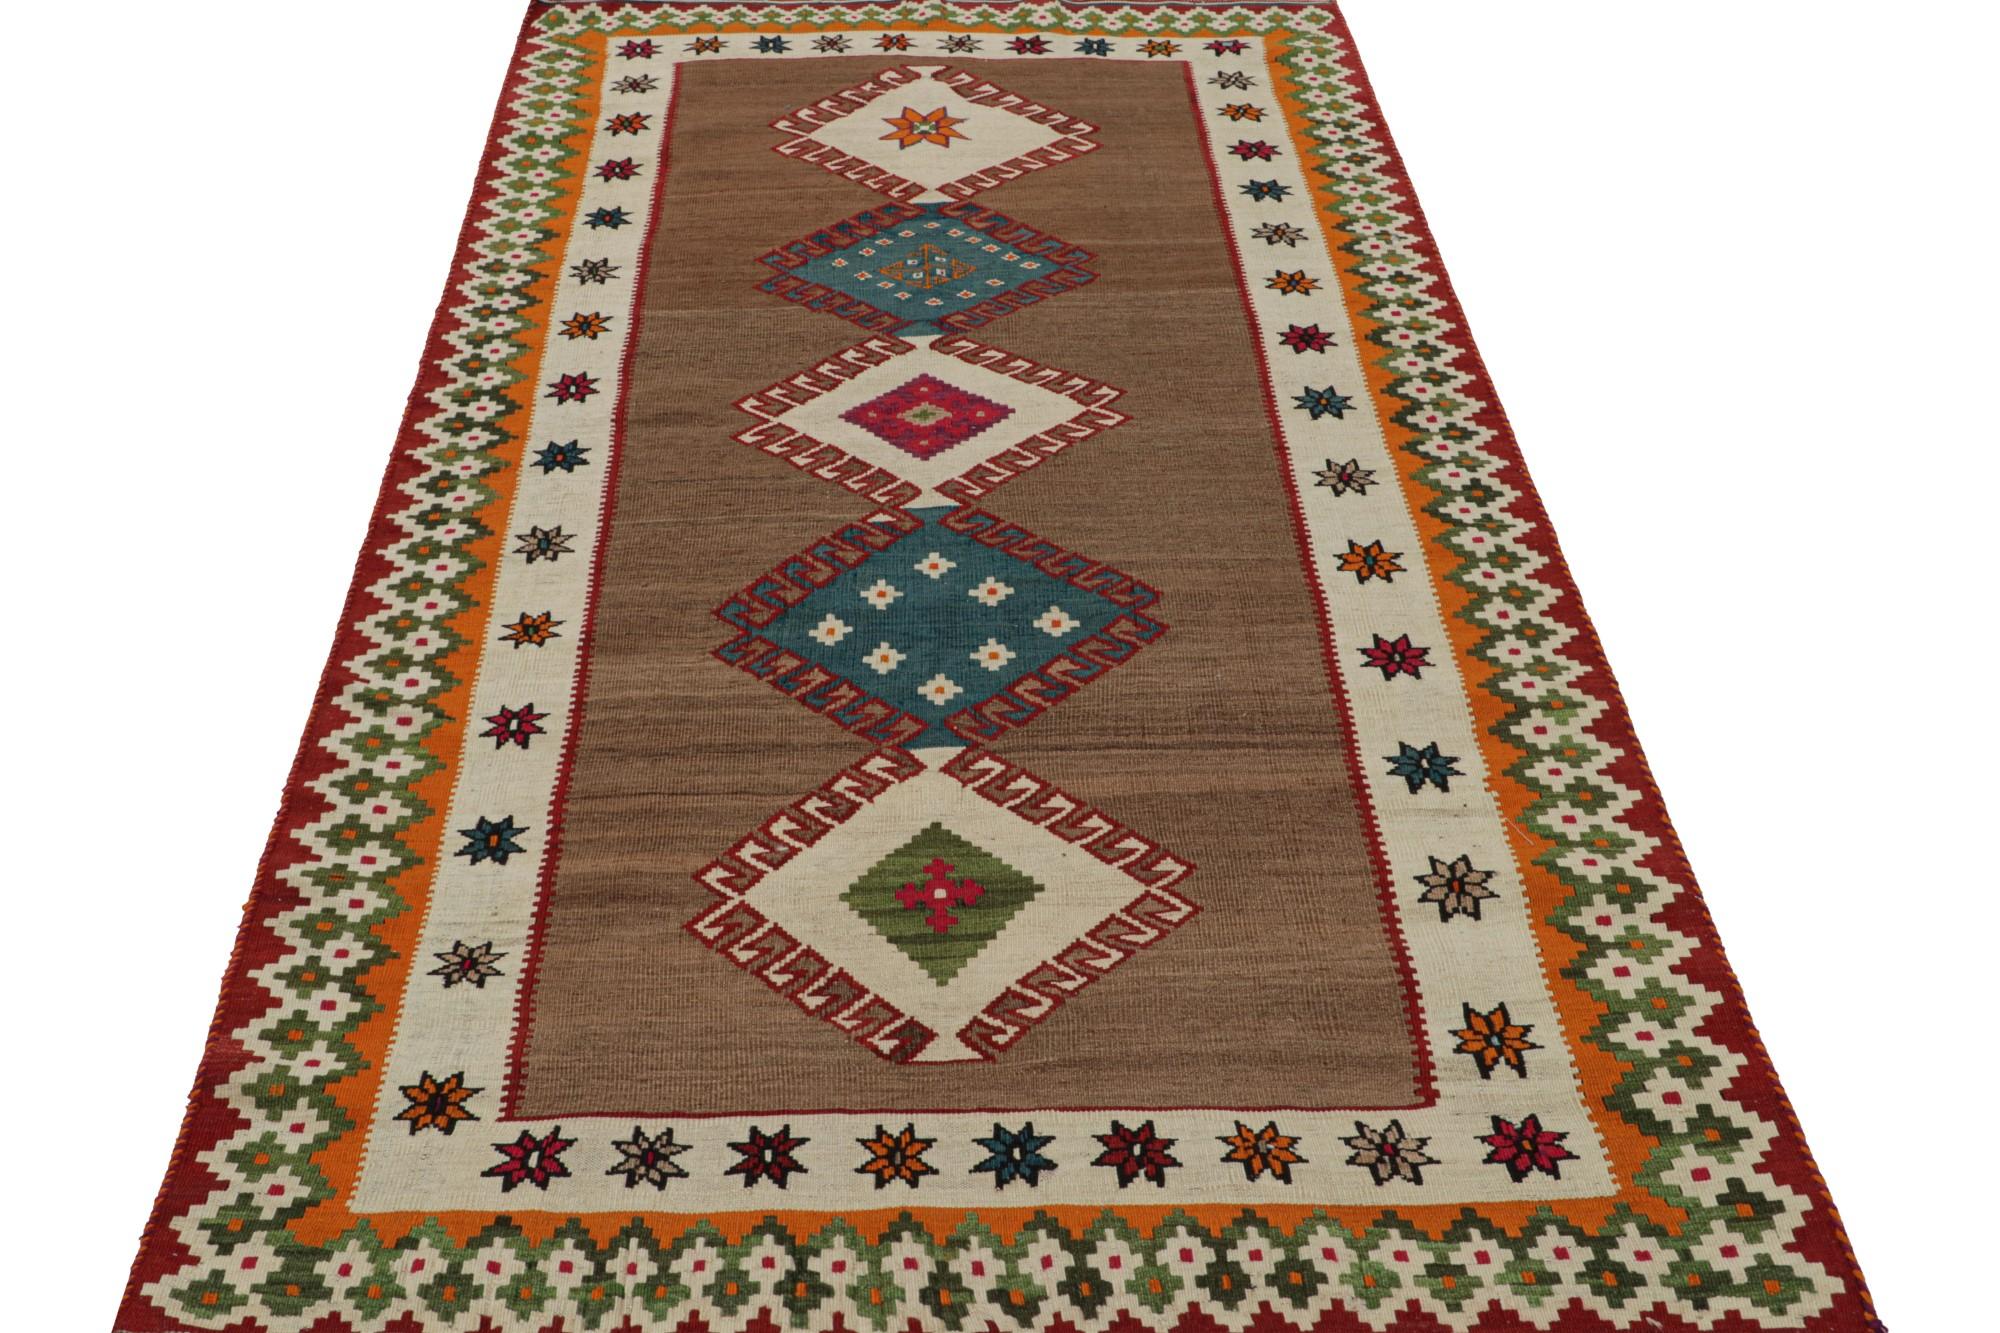 Hand-Woven Vintage Tribal Afghan Kilim Rug, with Geometric Patterns, from Rug & Kilim For Sale